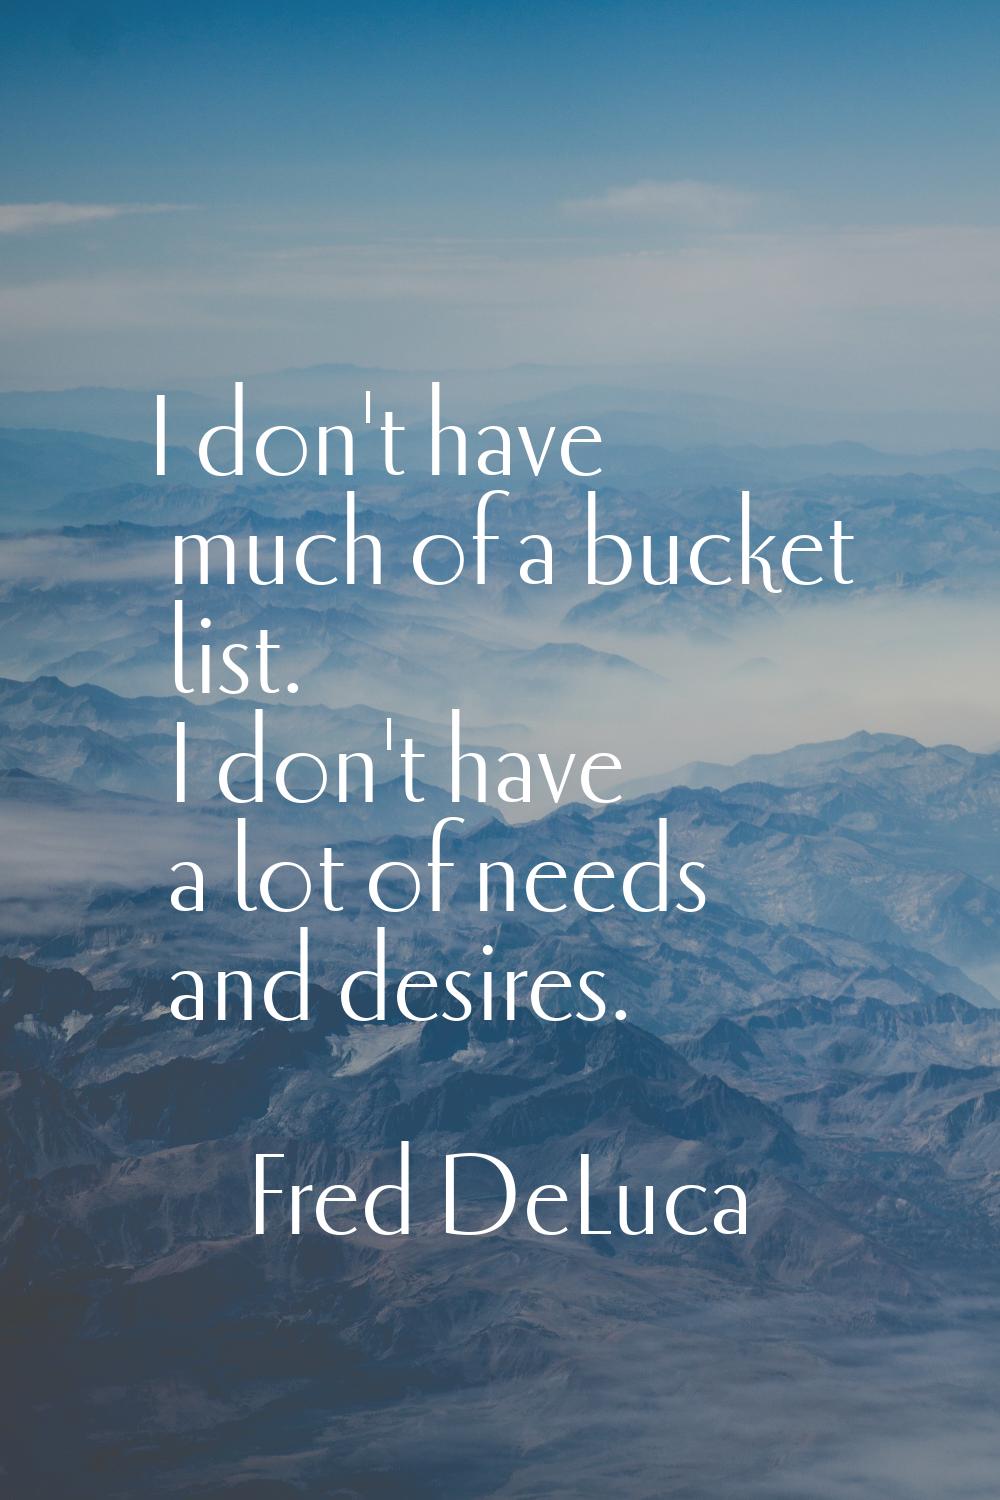 I don't have much of a bucket list. I don't have a lot of needs and desires.